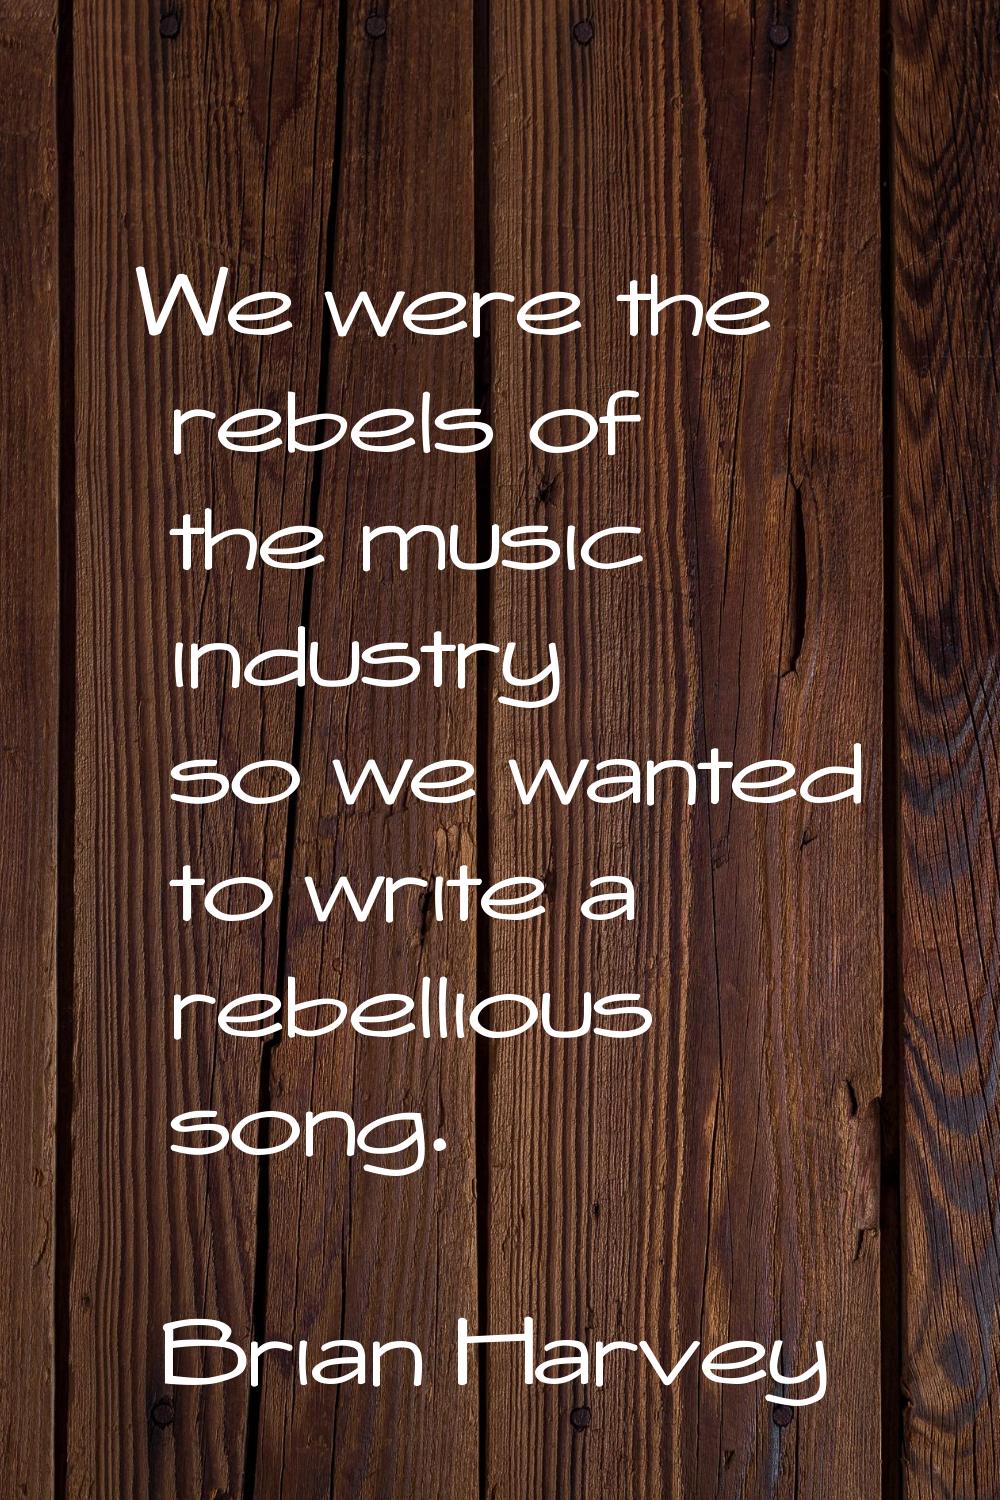 We were the rebels of the music industry so we wanted to write a rebellious song.